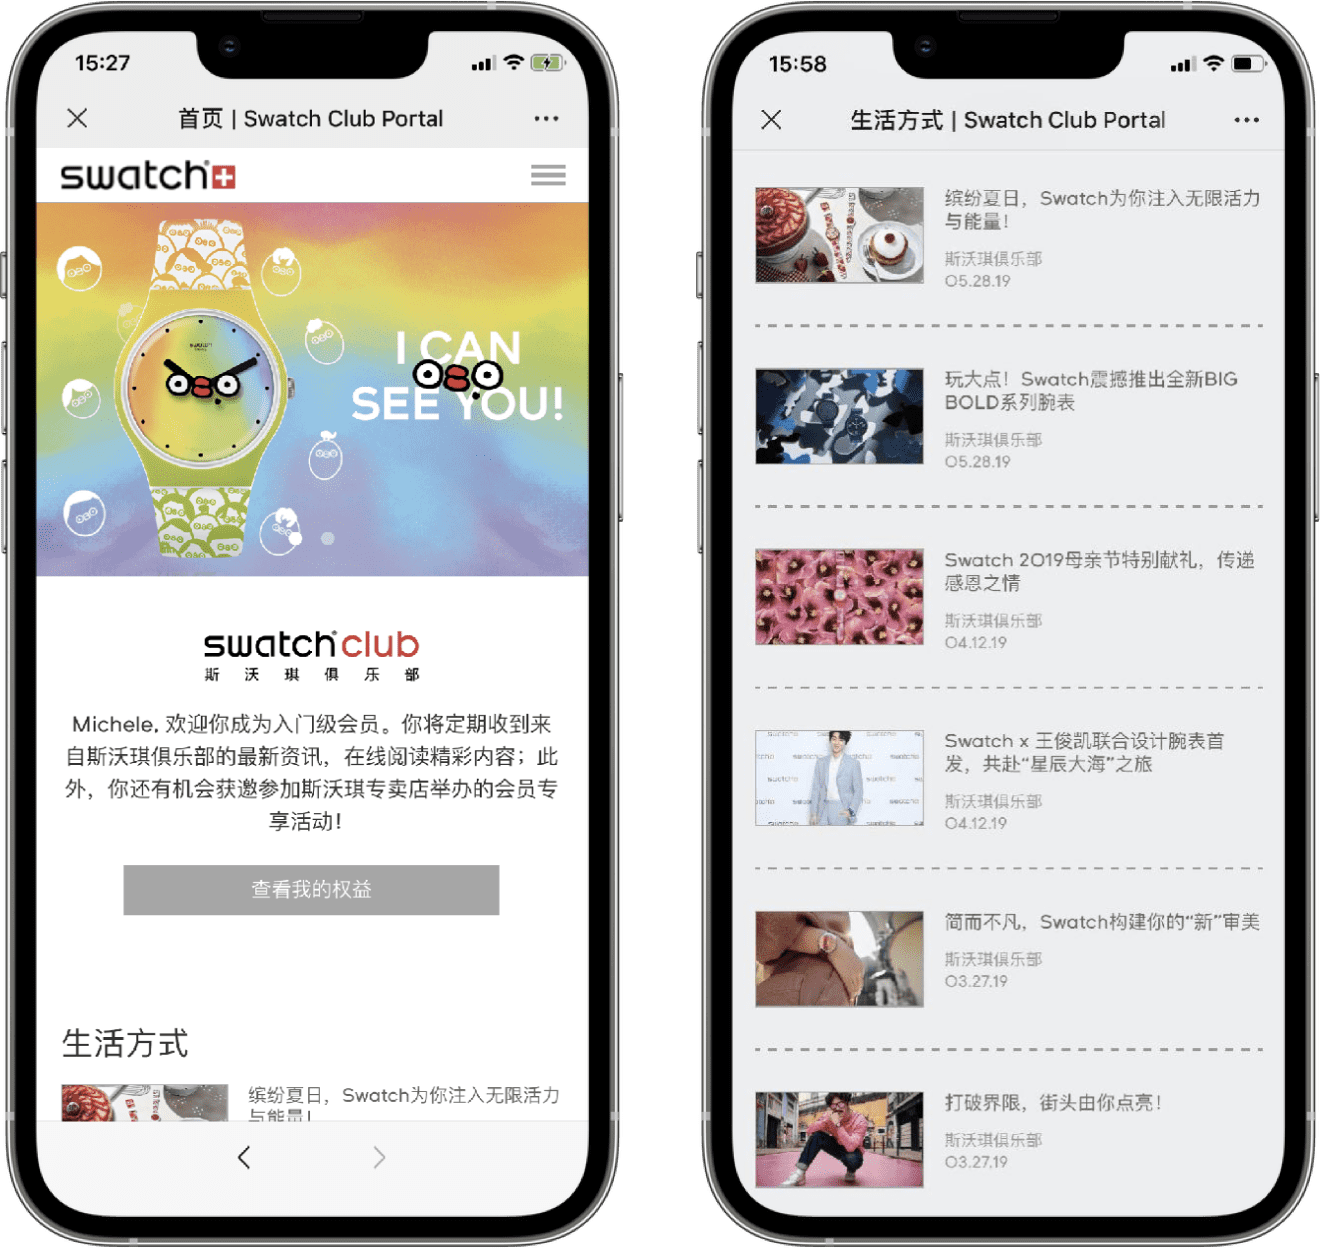 ITC built a WeChat Mini Program for Swatch with Magento as the backend platform